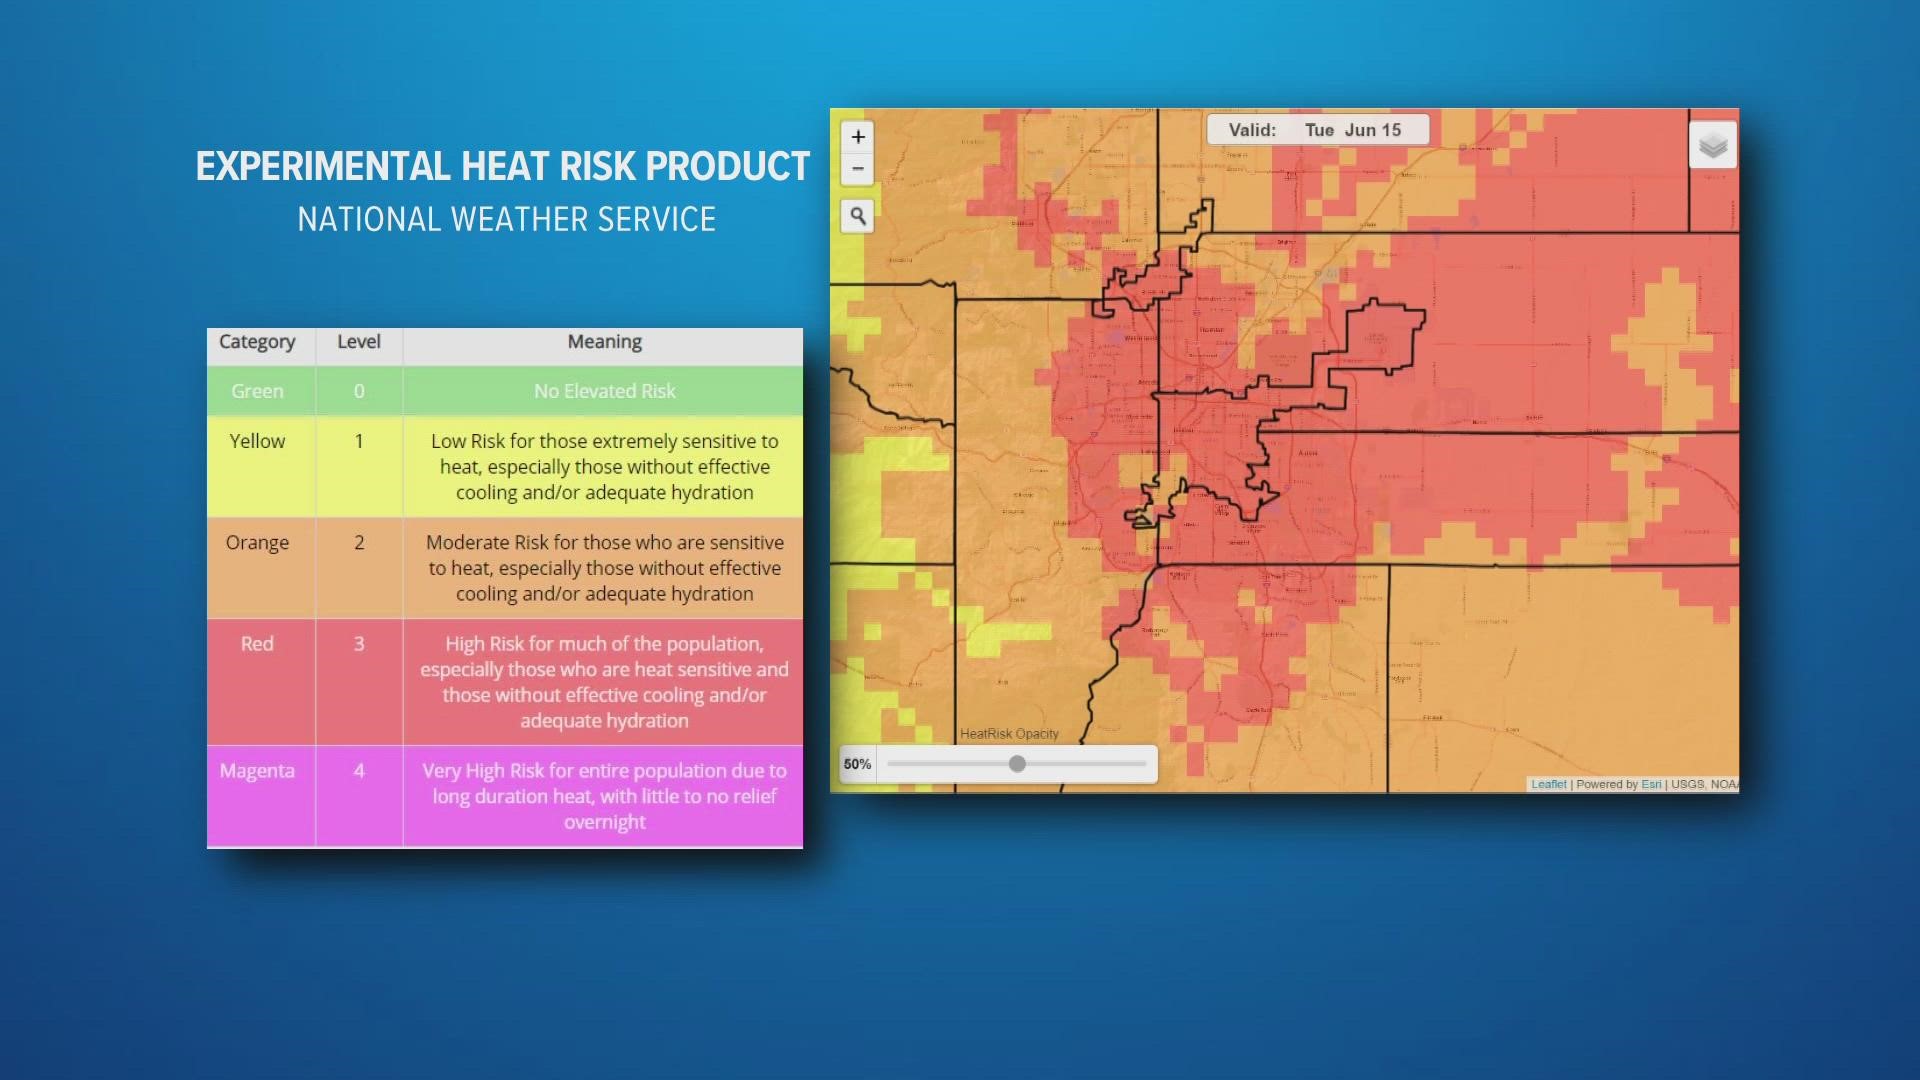 Friday was Denver's third 90 degree day this year but it was even hotter on the W. Slope. Meteorologist Cory Reppenhagen explains why heat advisories are so rare.